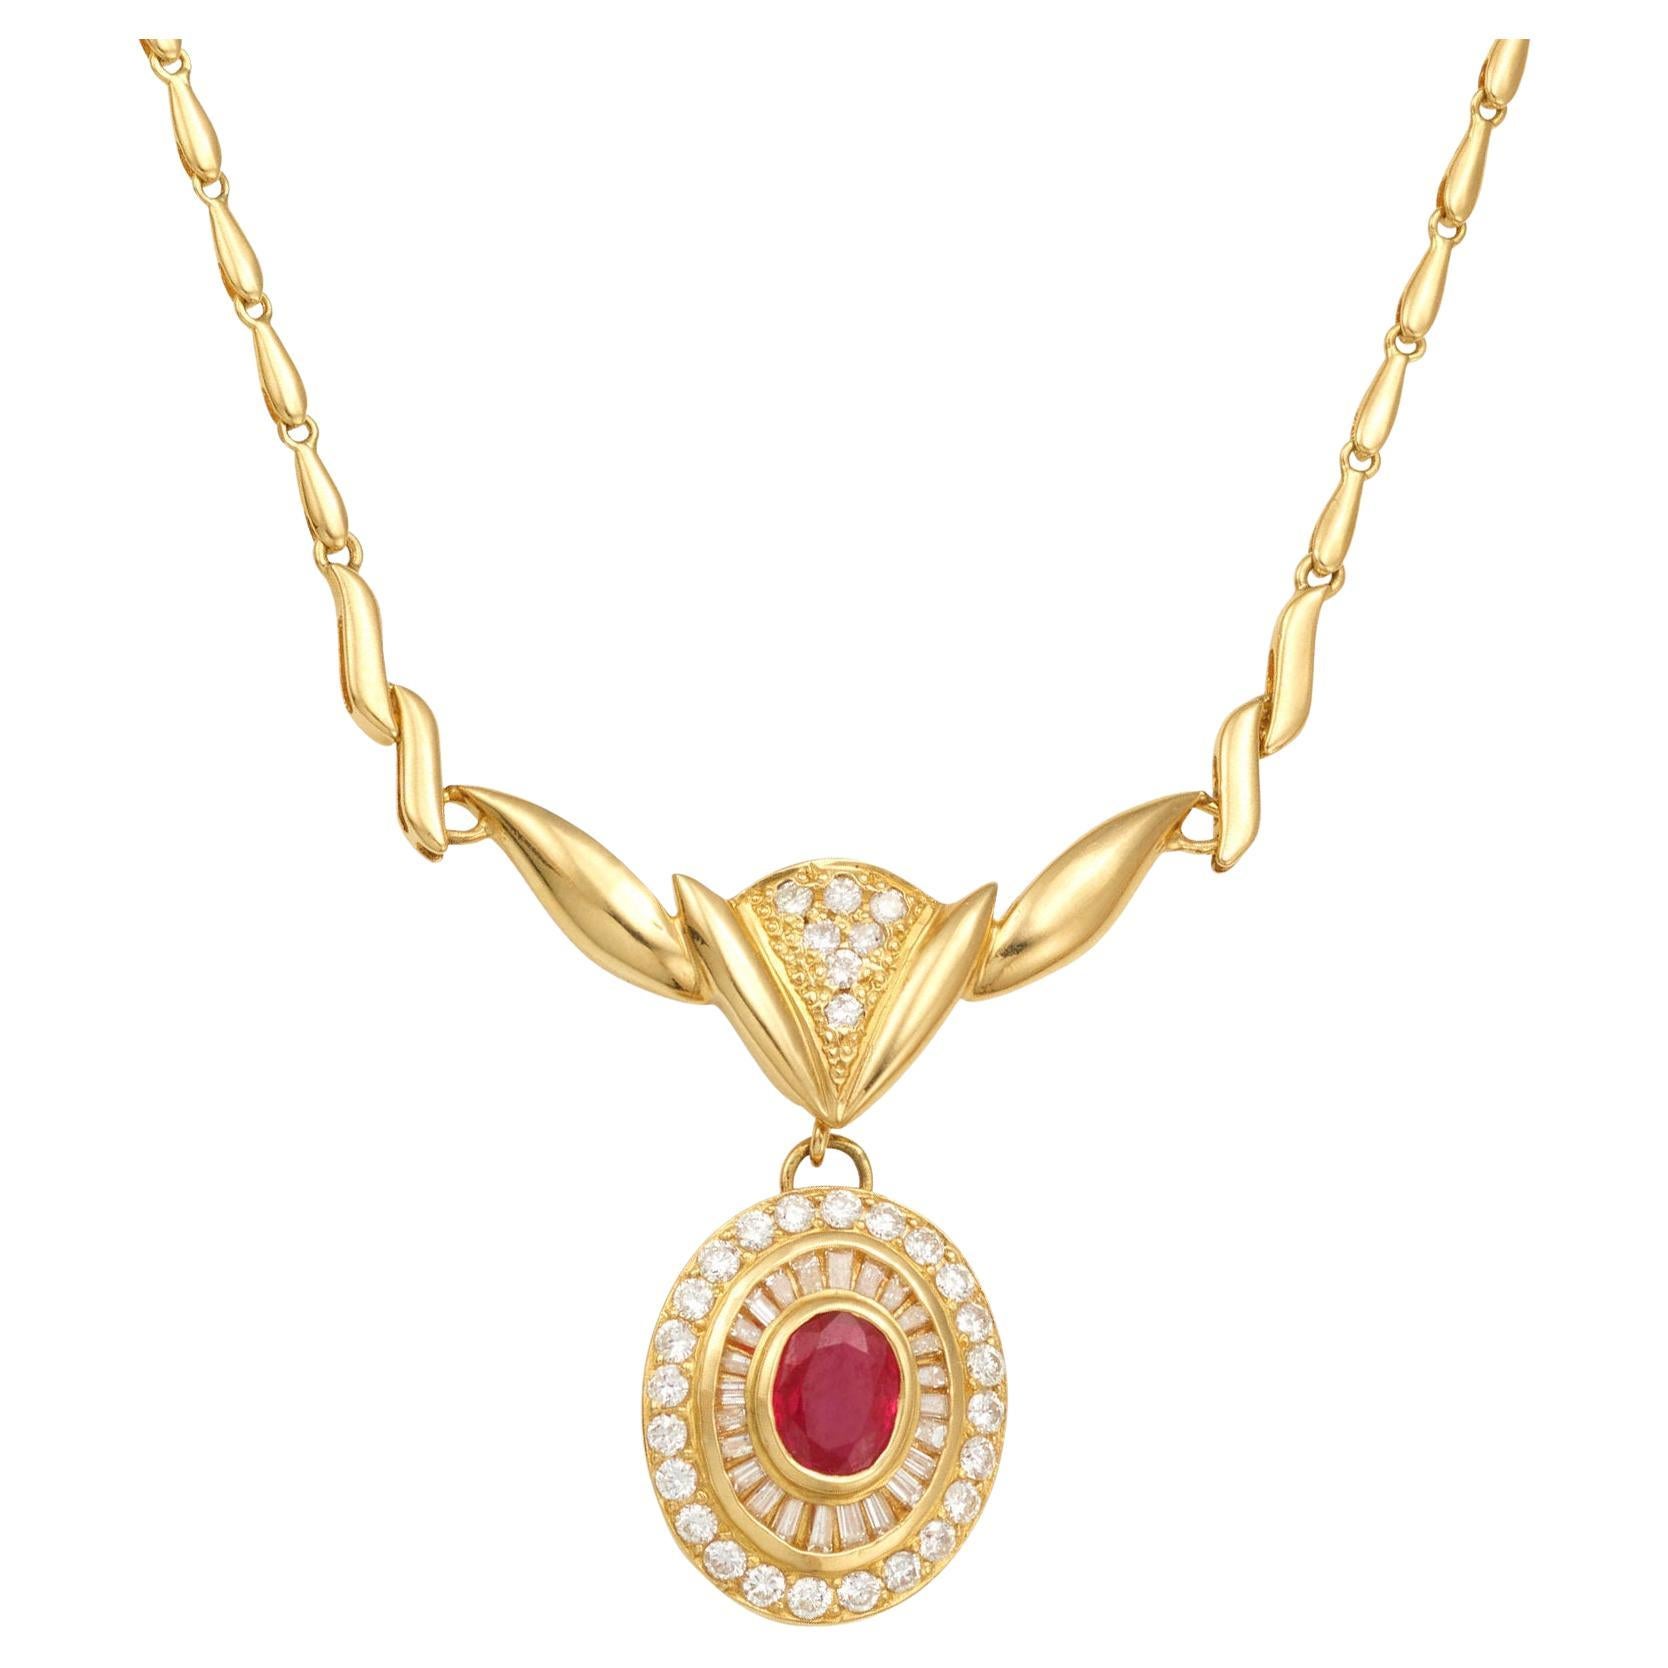  Natural Ruby Pendant Necklace Set With Diamonds 2.06 Carats 18K Yellow Gold